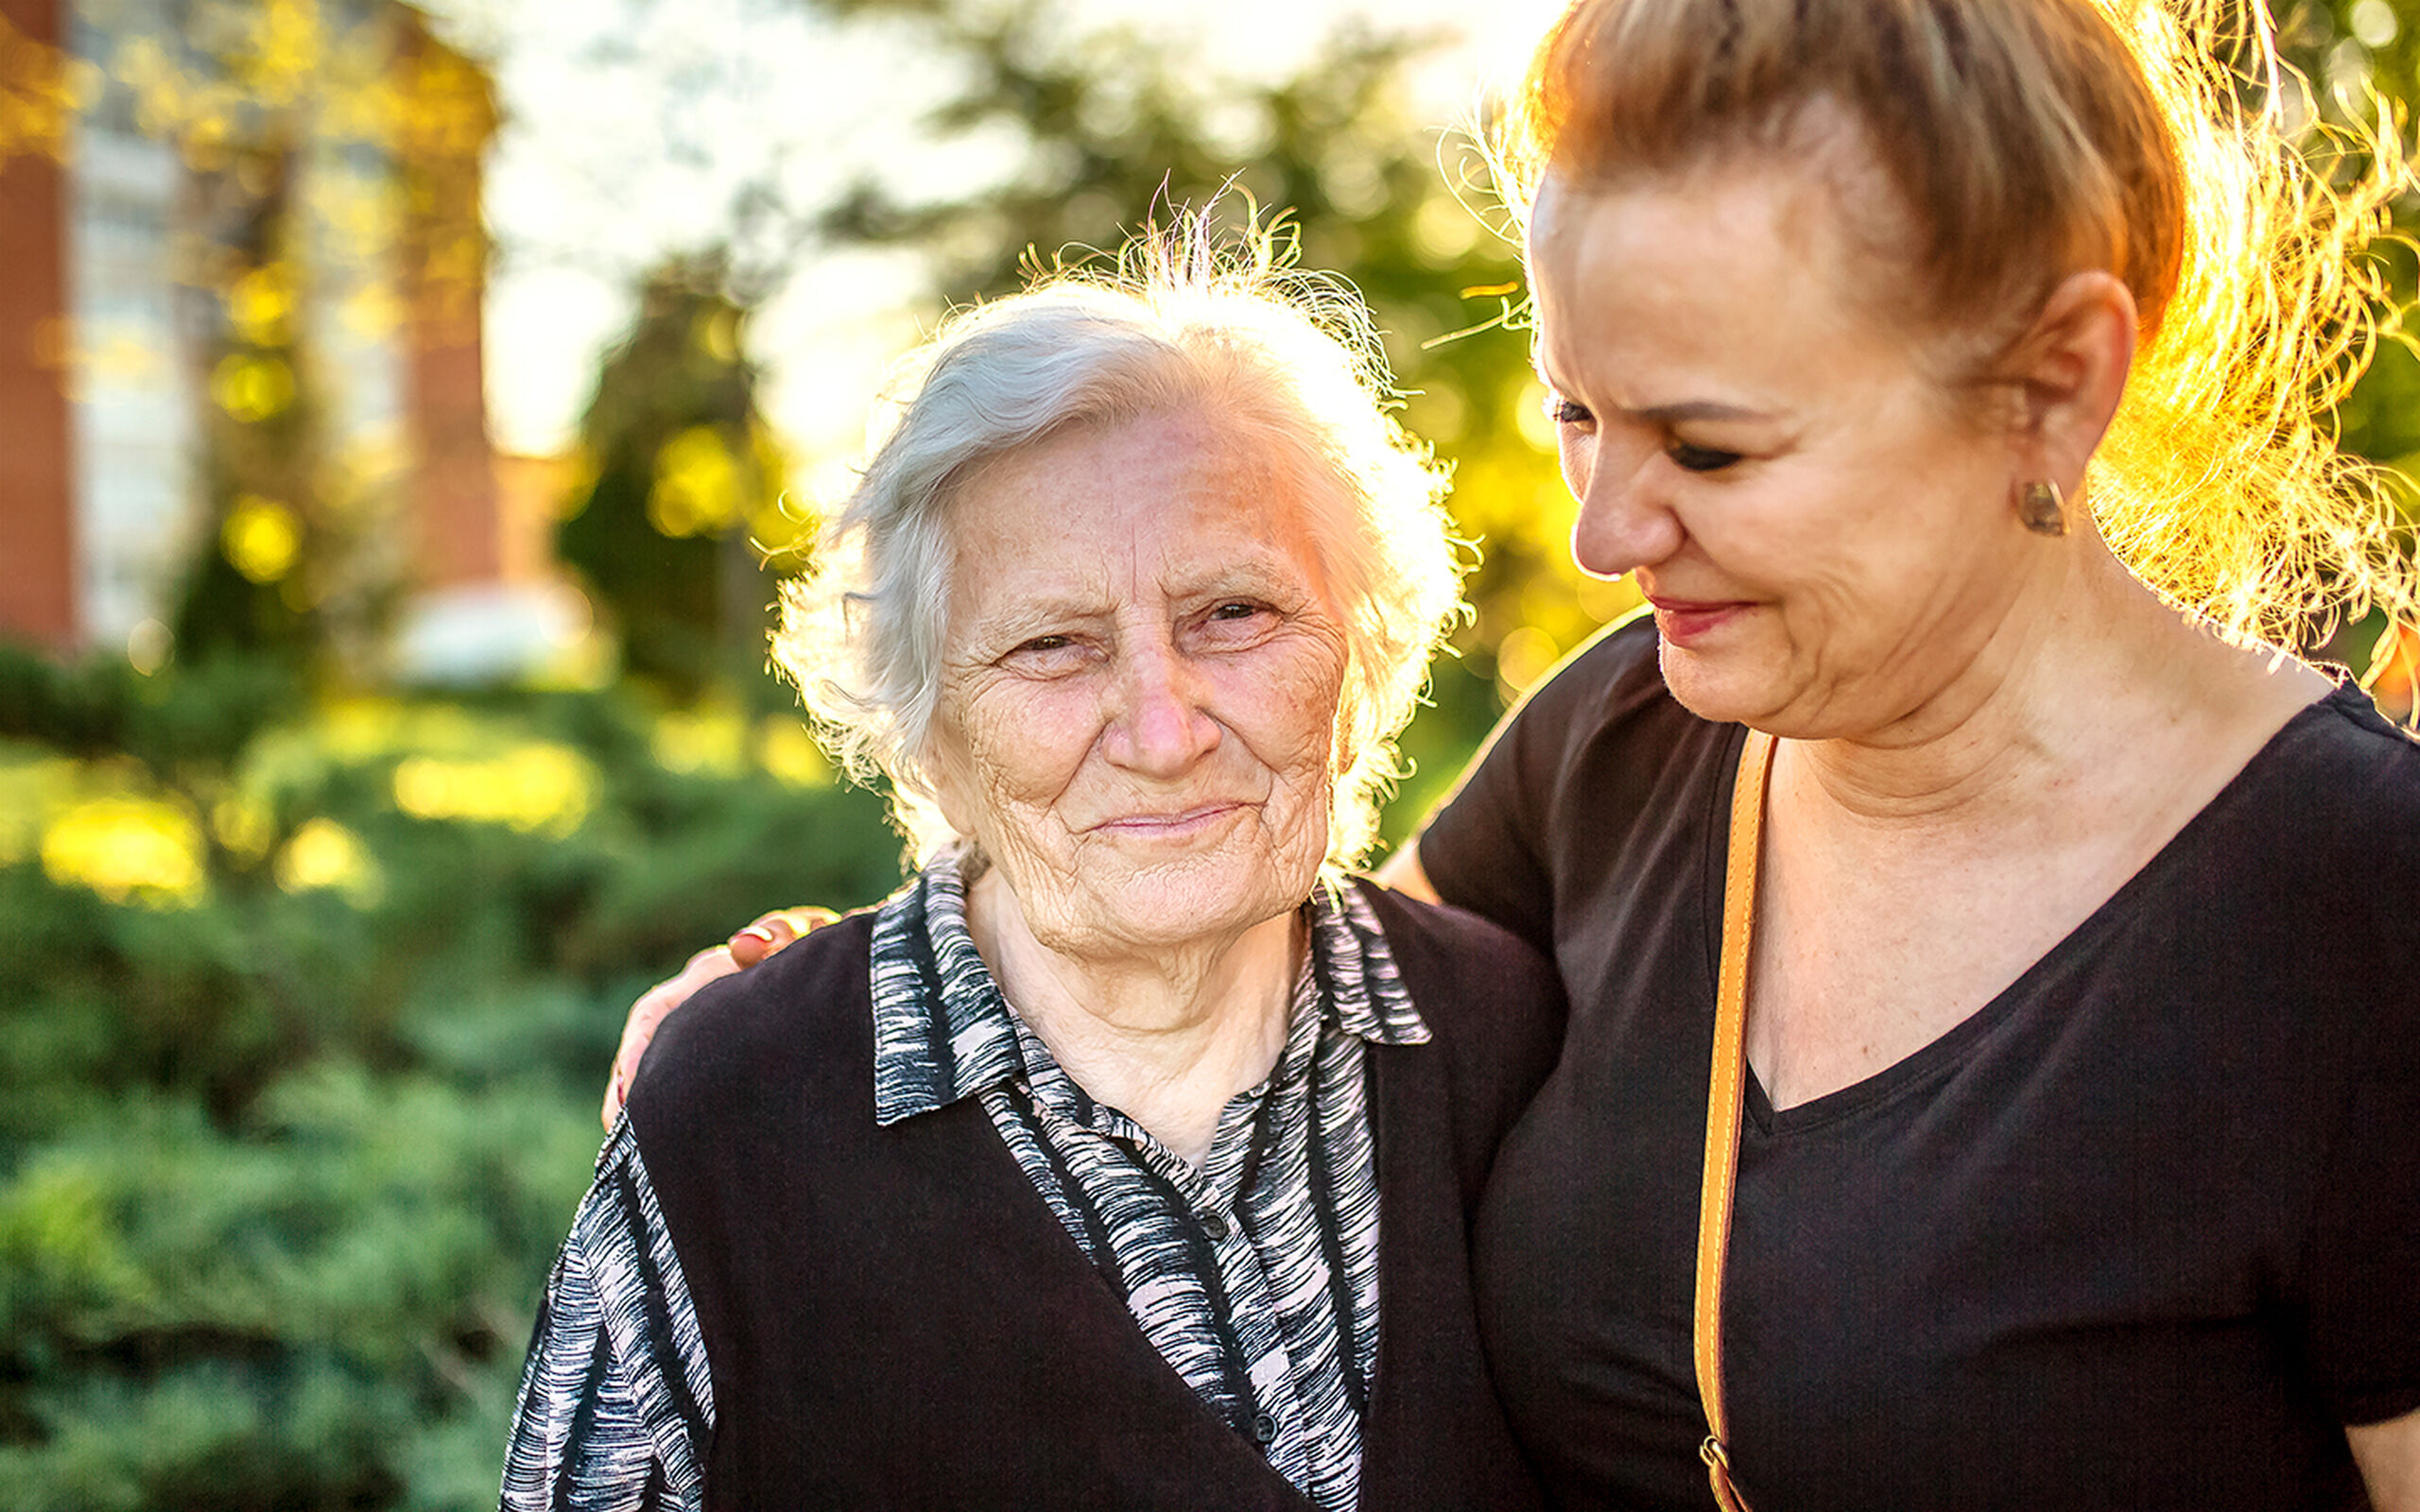 aged care resident smiling while being hugged by a baptistcare aged care worker in the nursing home